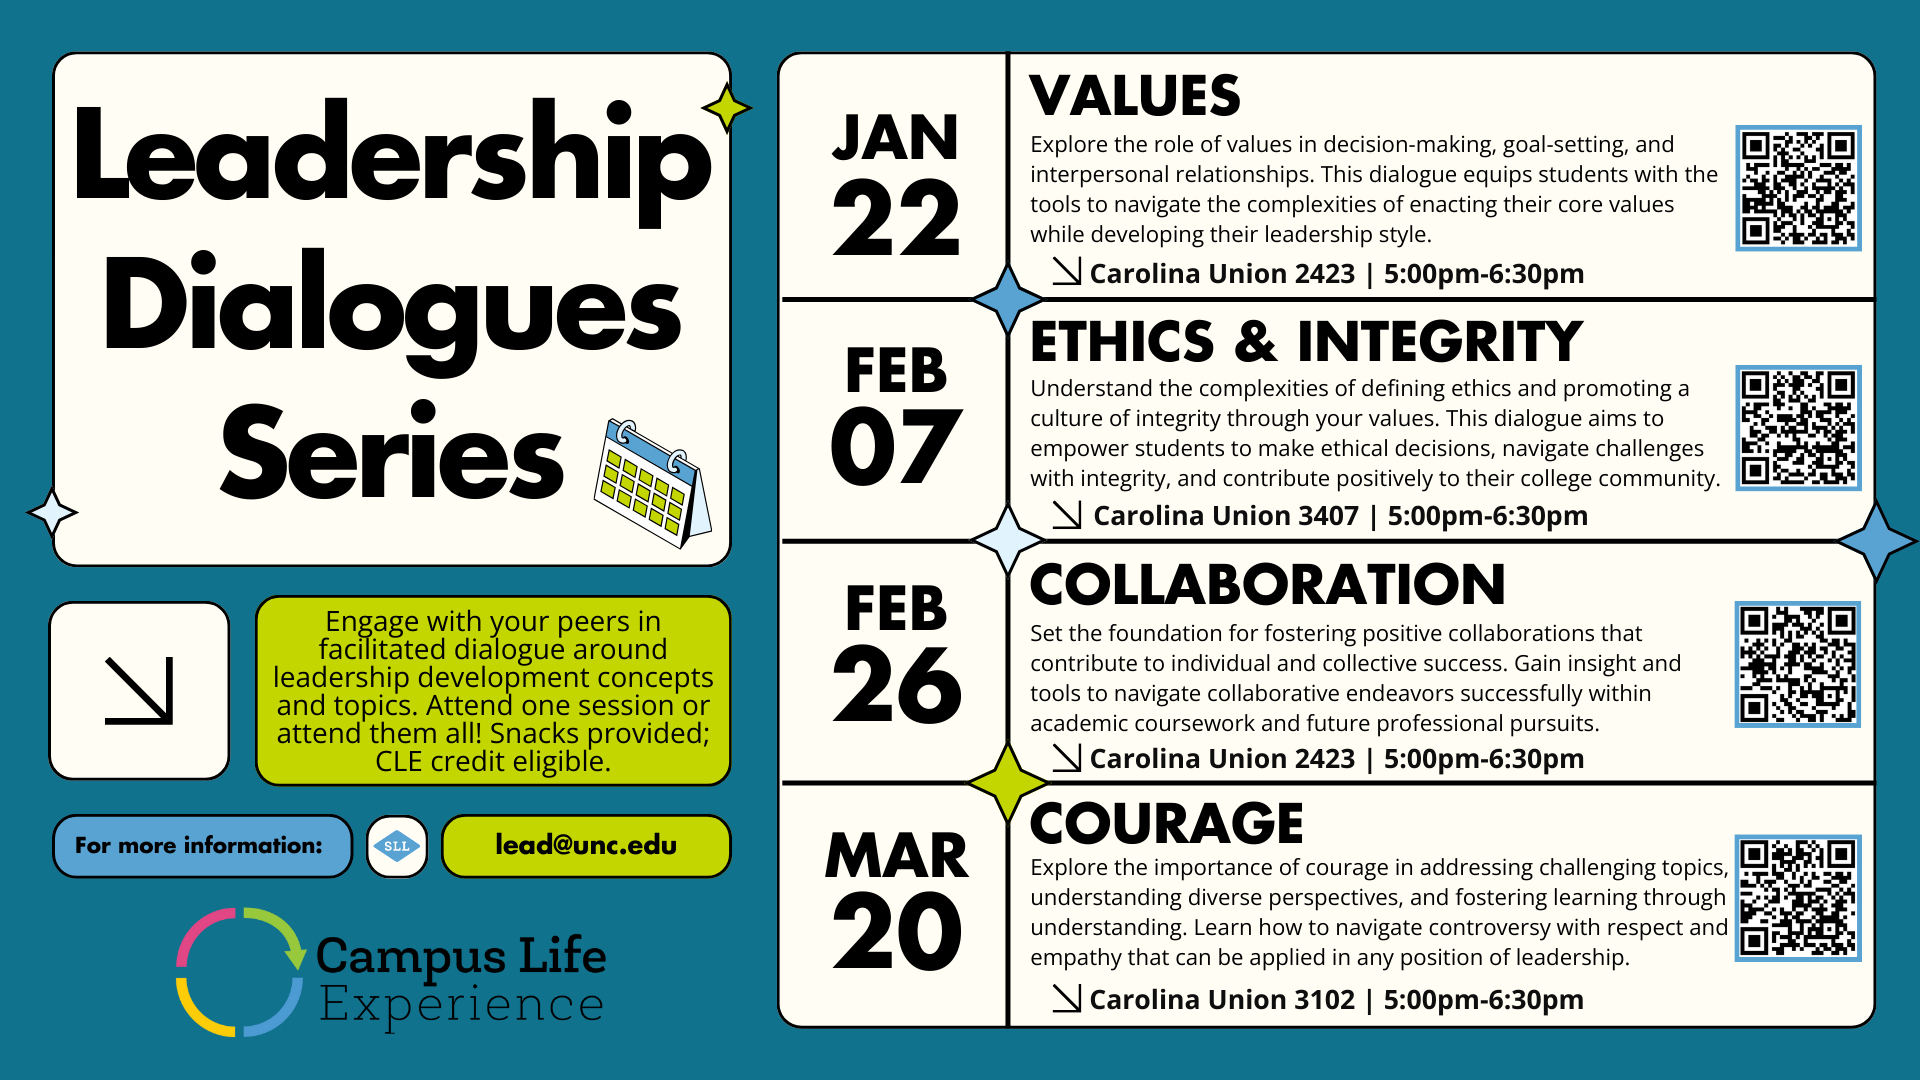 Leadership Dialogues Series Schedule